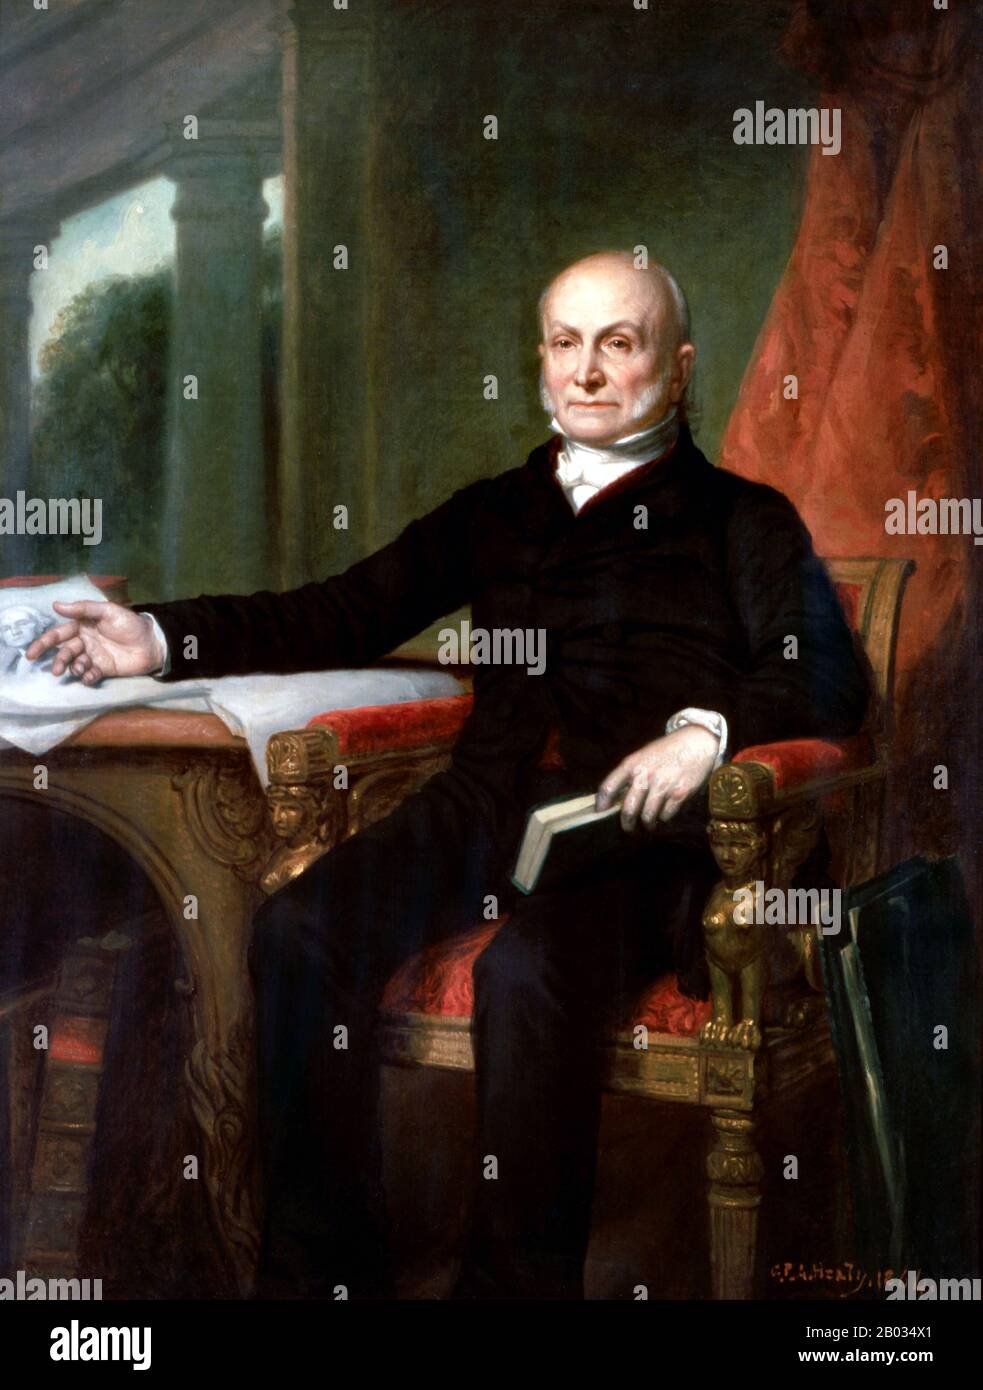 John Quincy Adams July 11, 1767 – February 23, 1848) was an American statesman who served as the sixth President of the United States from 1825 to 1829. He also served as a diplomat, a Senator and member of the House of Representatives.  He was a member of the Federalist, Democratic-Republican, National Republican, and later Anti-Masonic and Whig parties. Stock Photo